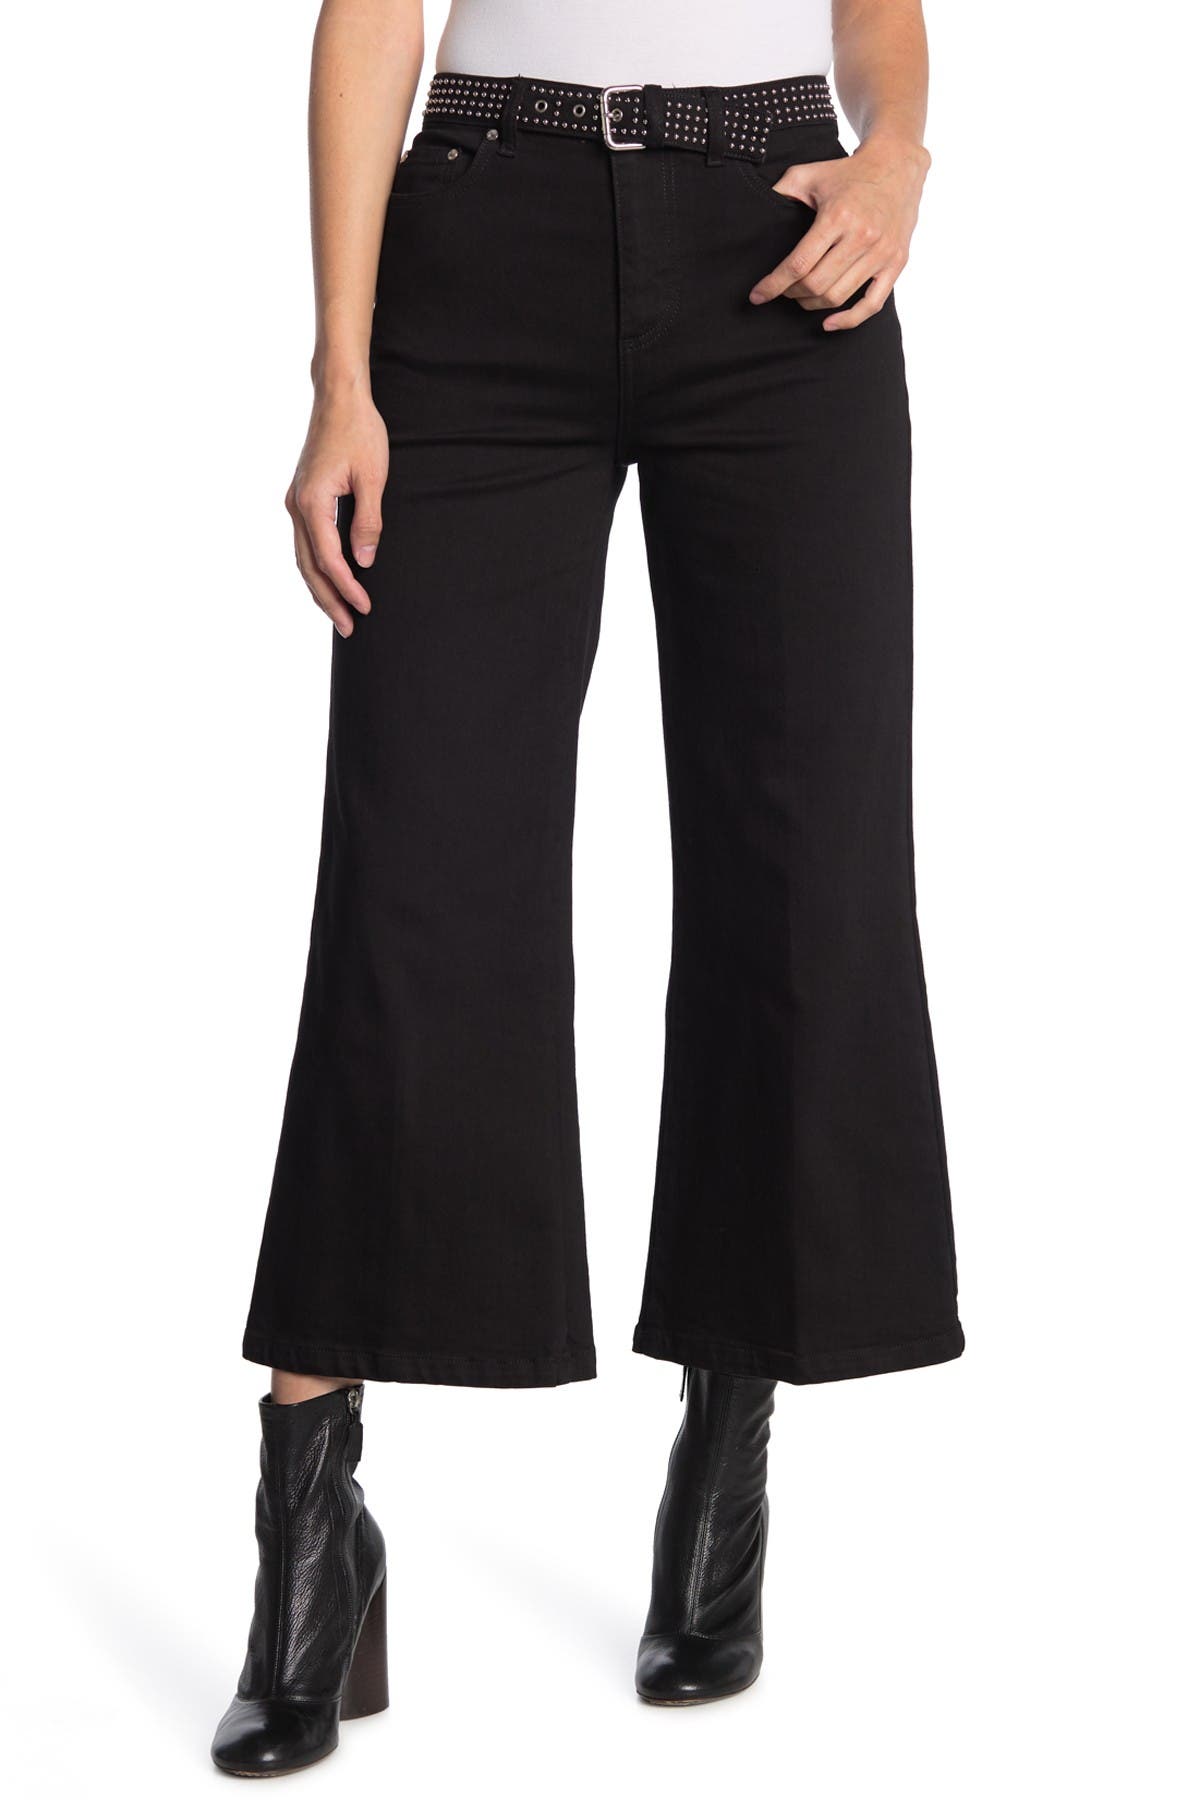 Red Valentino Wide Leg Jeans In Black